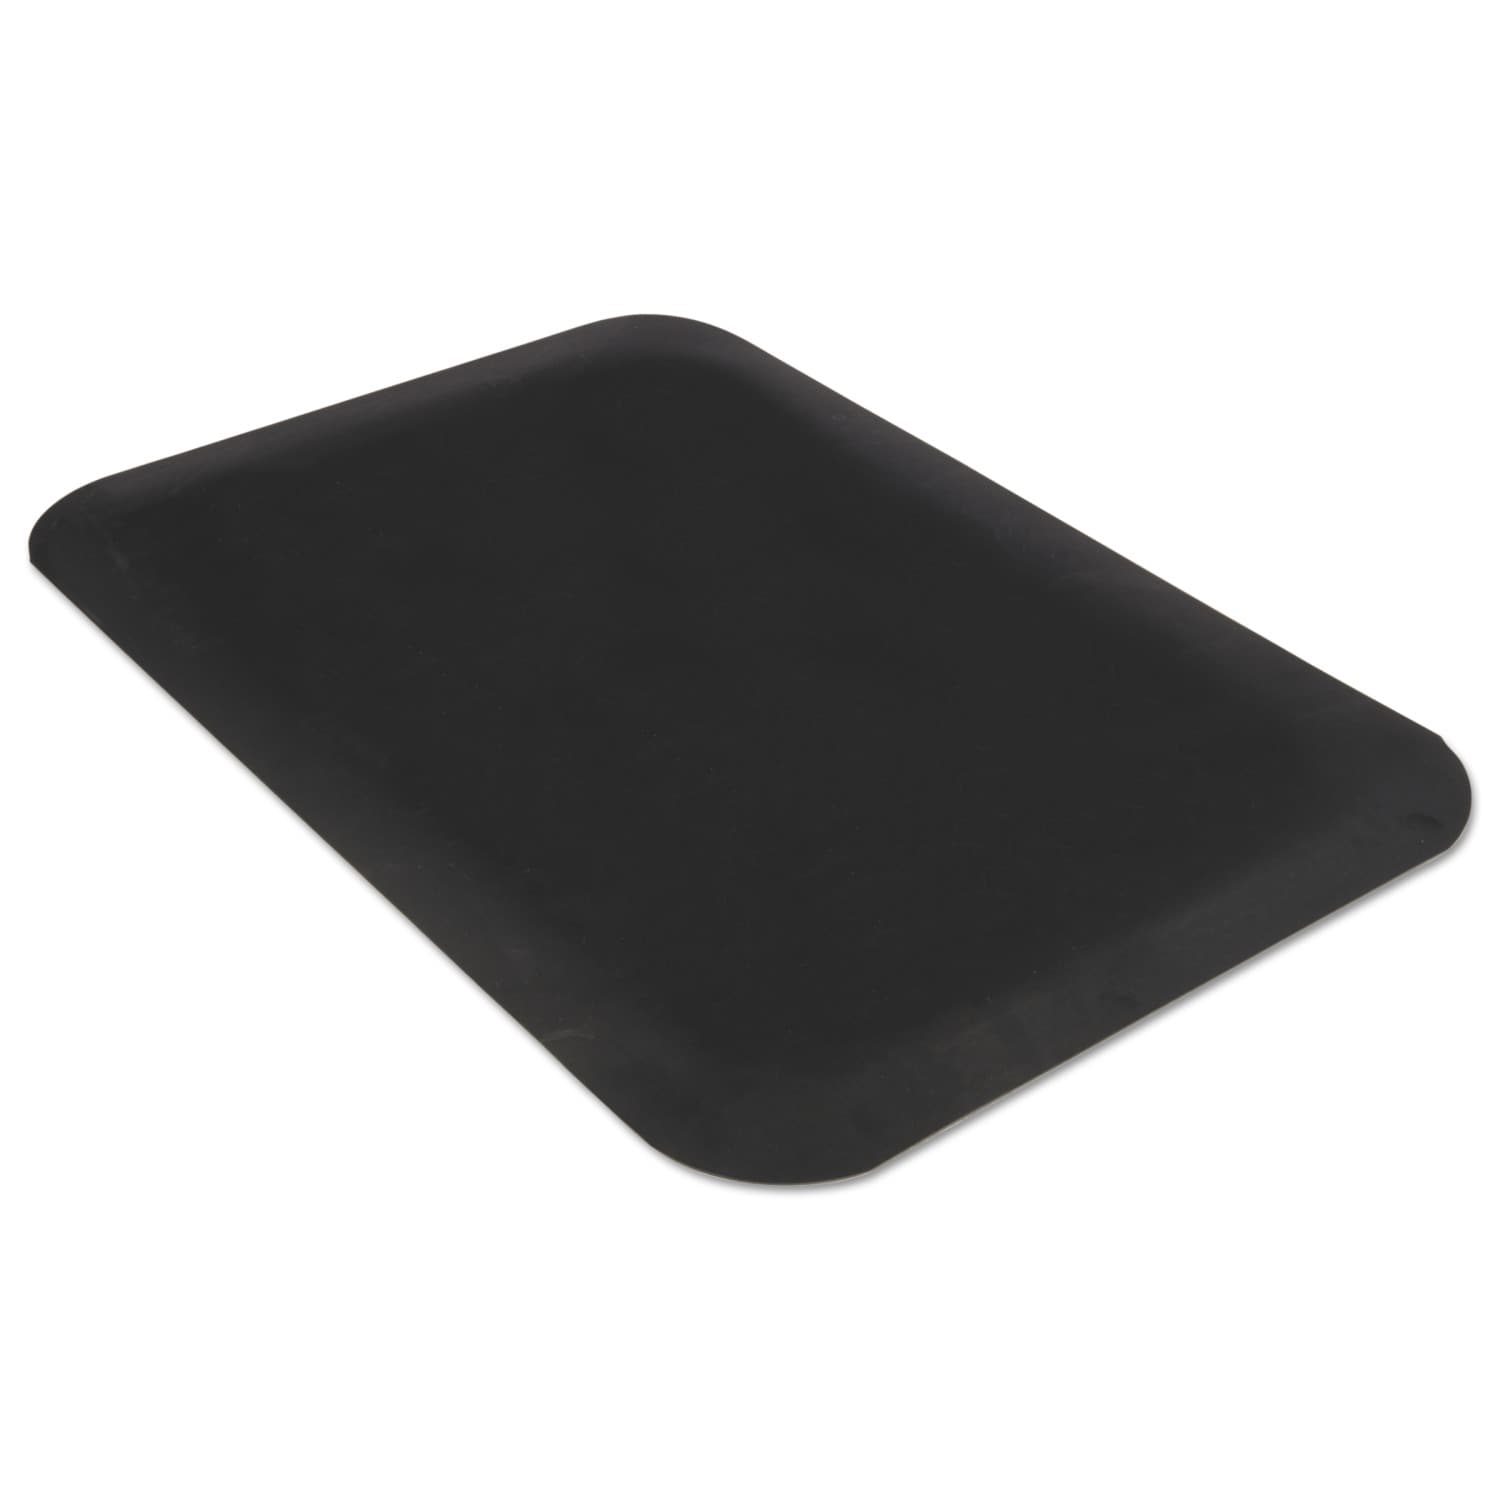 Choice 3' x 5' Black Rubber Anti-Fatigue Floor Mat with Beveled Edge - 1/2  Thick